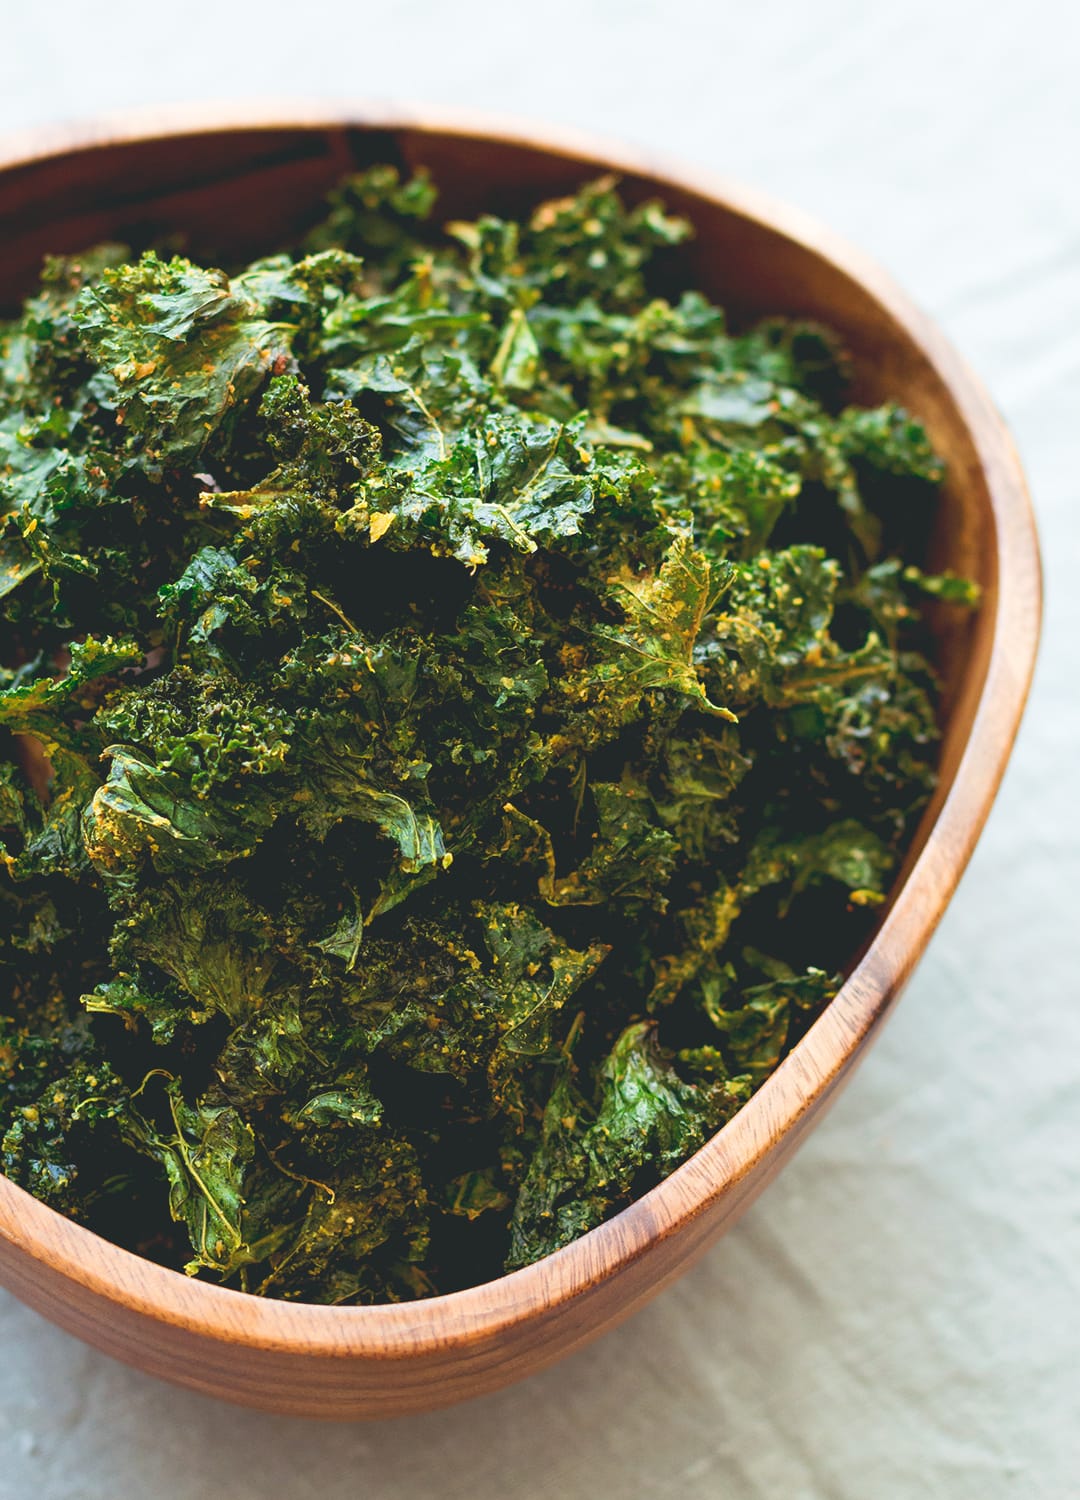 Onion Kale Chips - made in the oven in under 30 minutes! Easy & delicious these kale chips are the perfect movie night snack or anytime you're craving something salty & crunchy. | thehealthfulideas.com